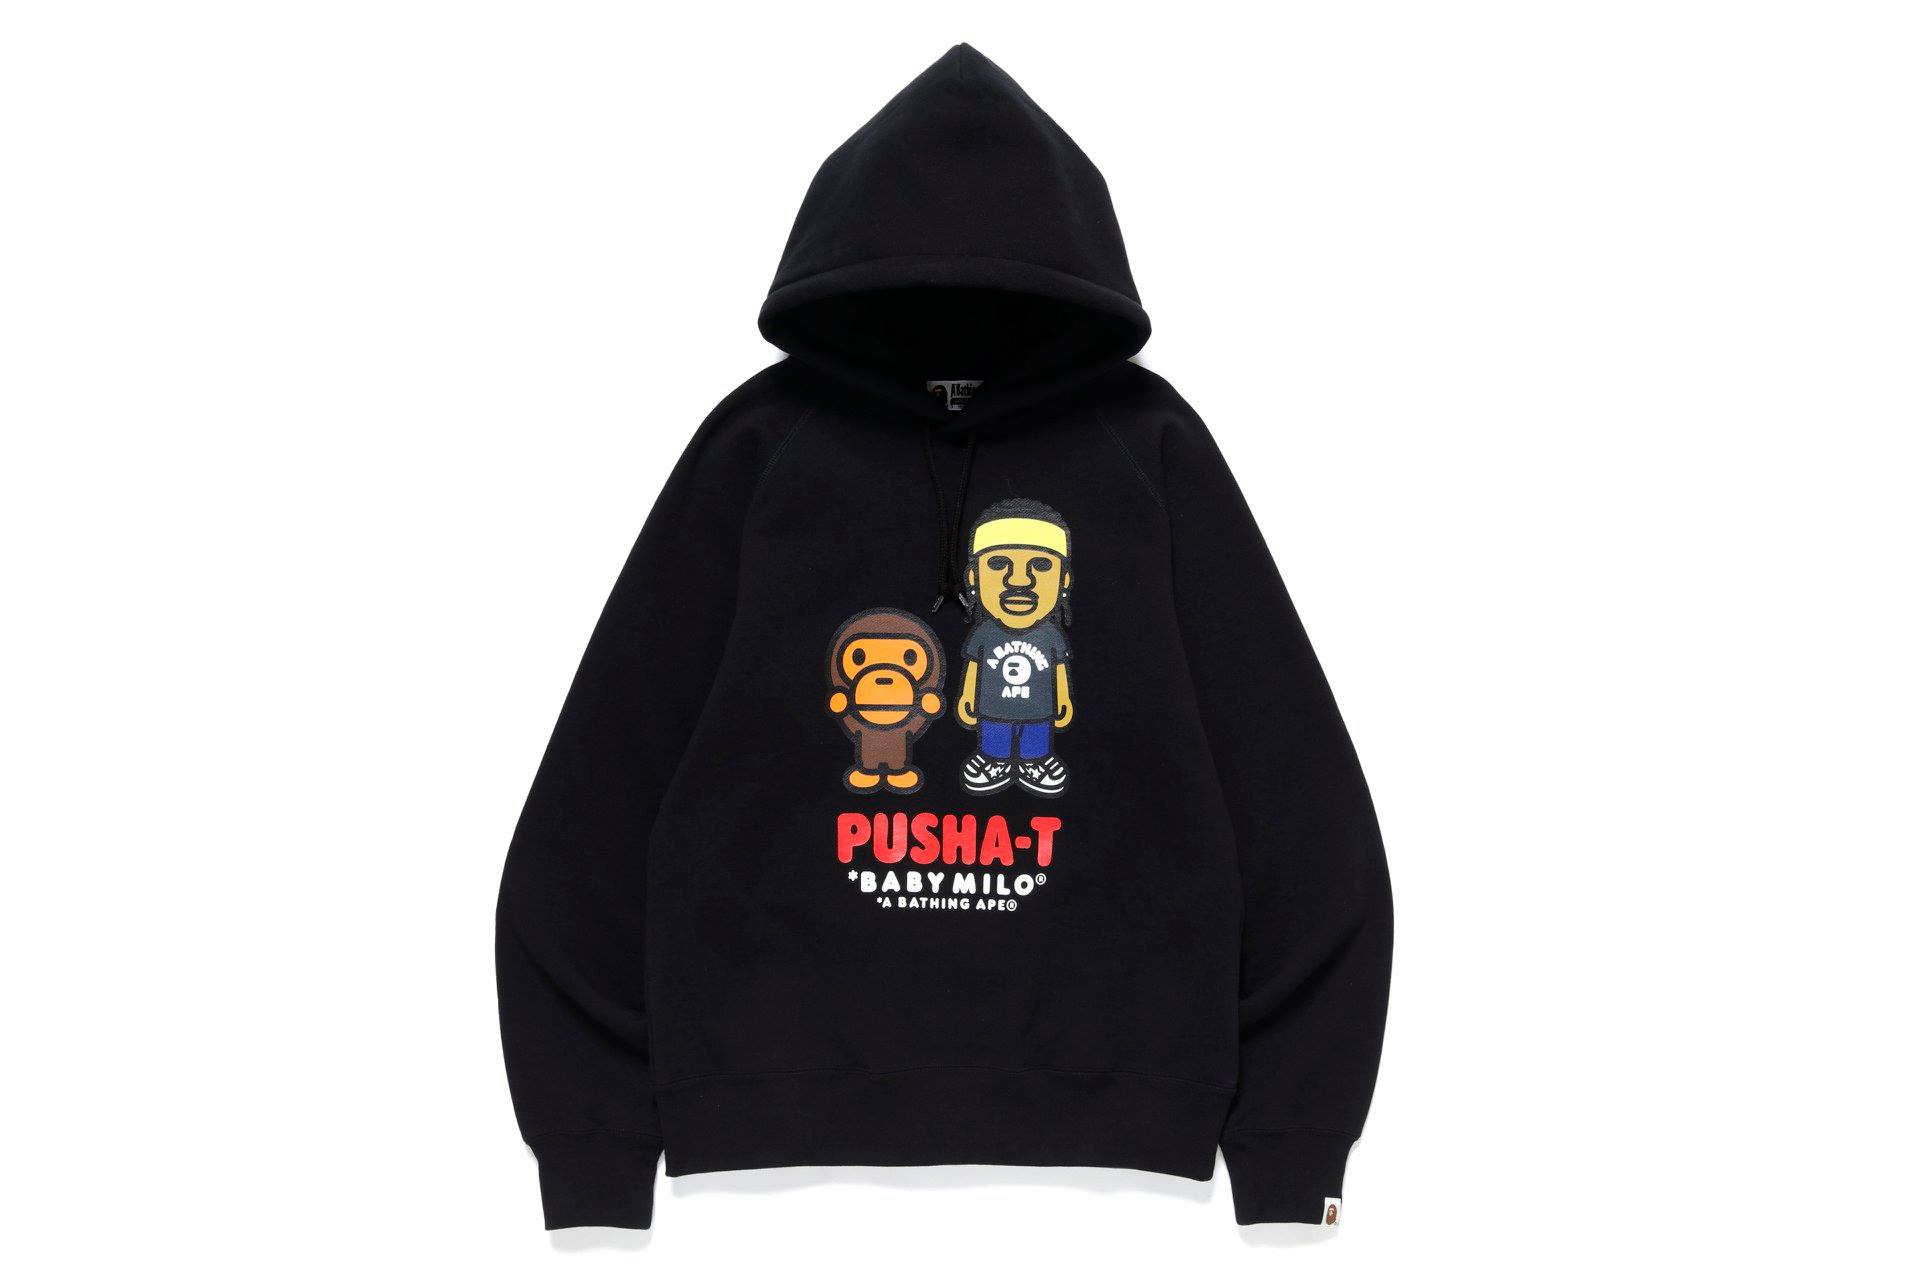 Pusha T x BAPE Collection Release Price/Date | Drops | Hypebeast